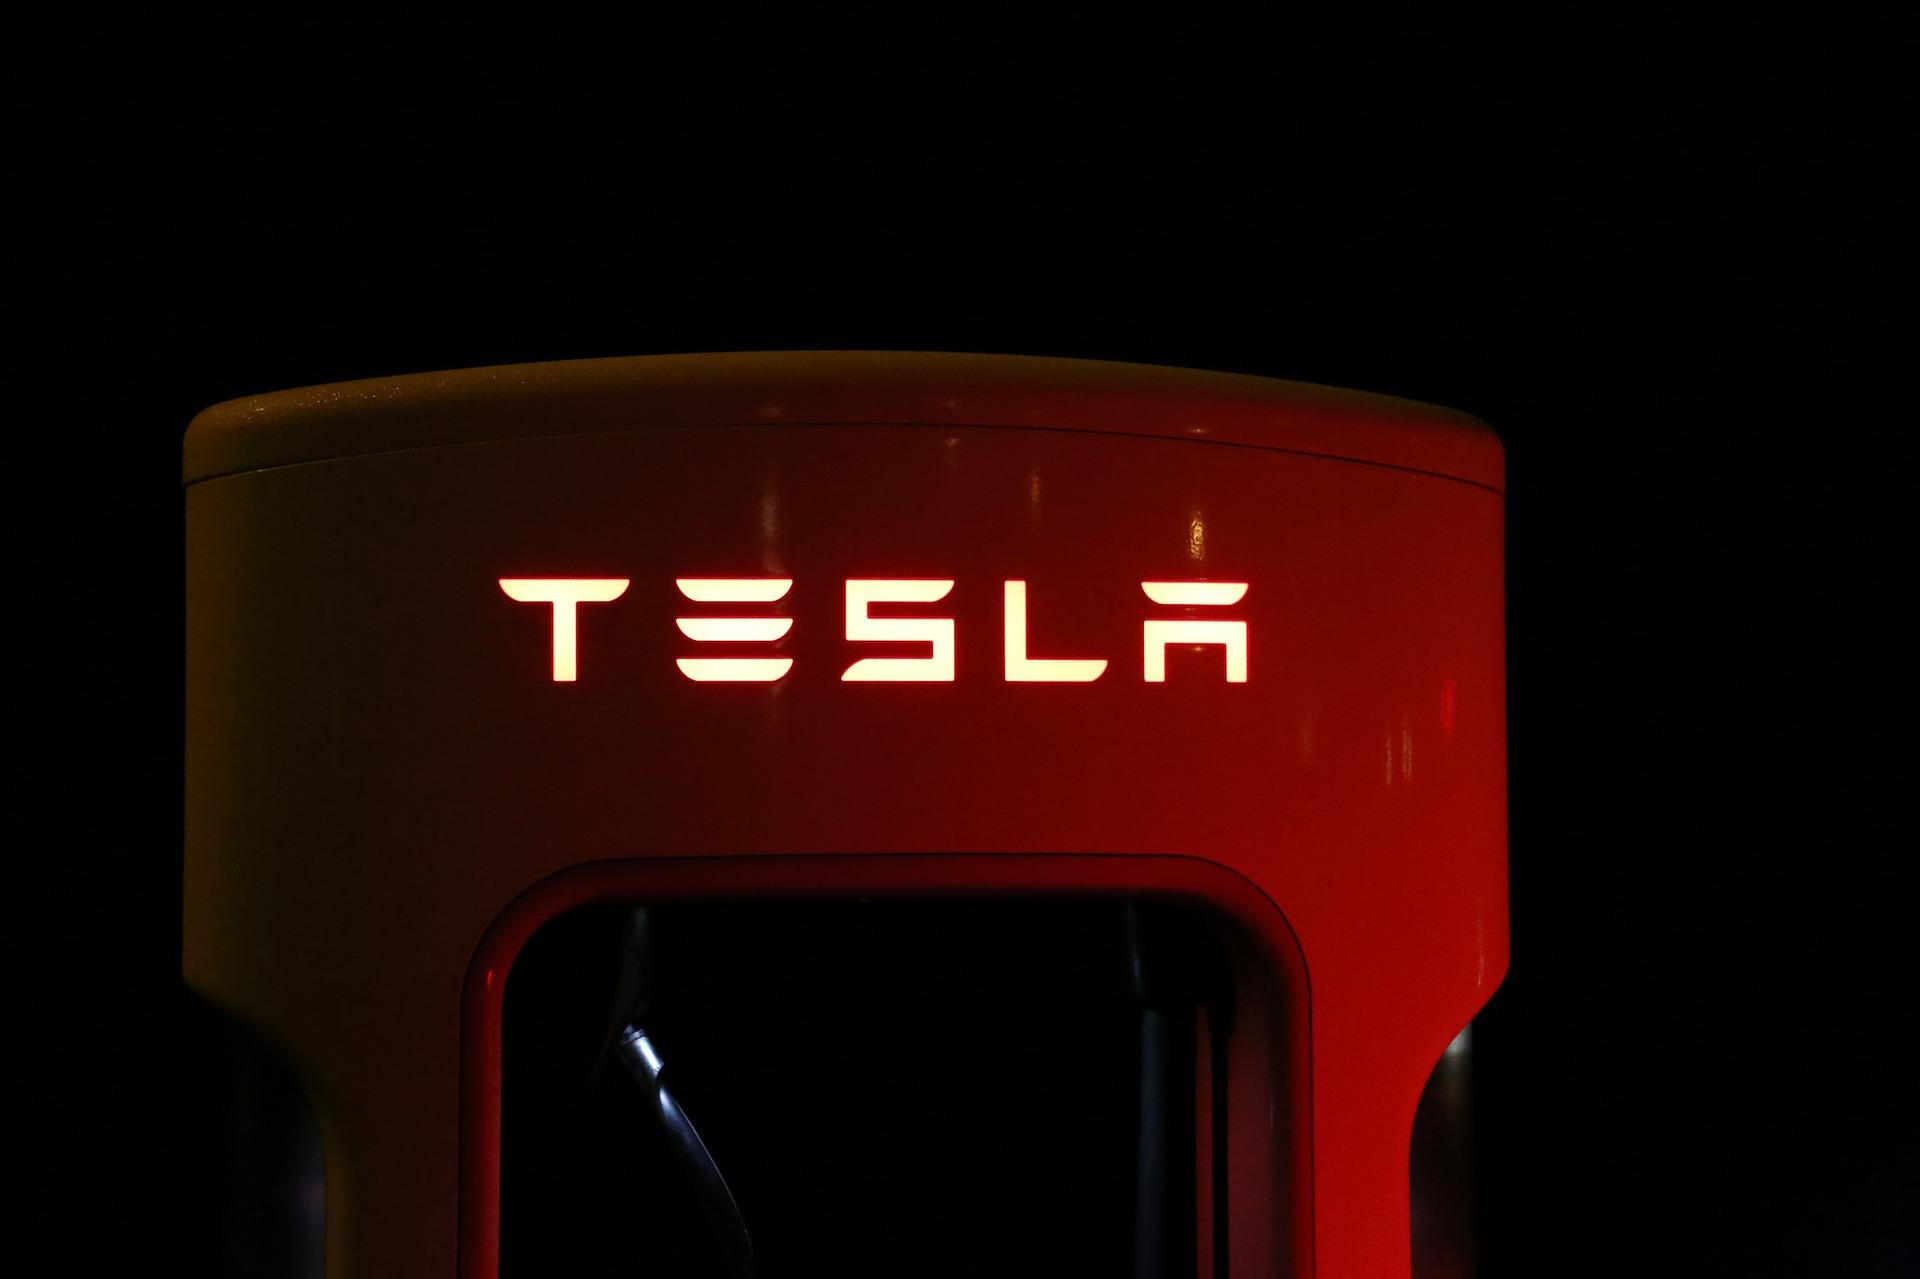 Tesla continues output at Gruenheide plant after Red Sea tensions disrupt